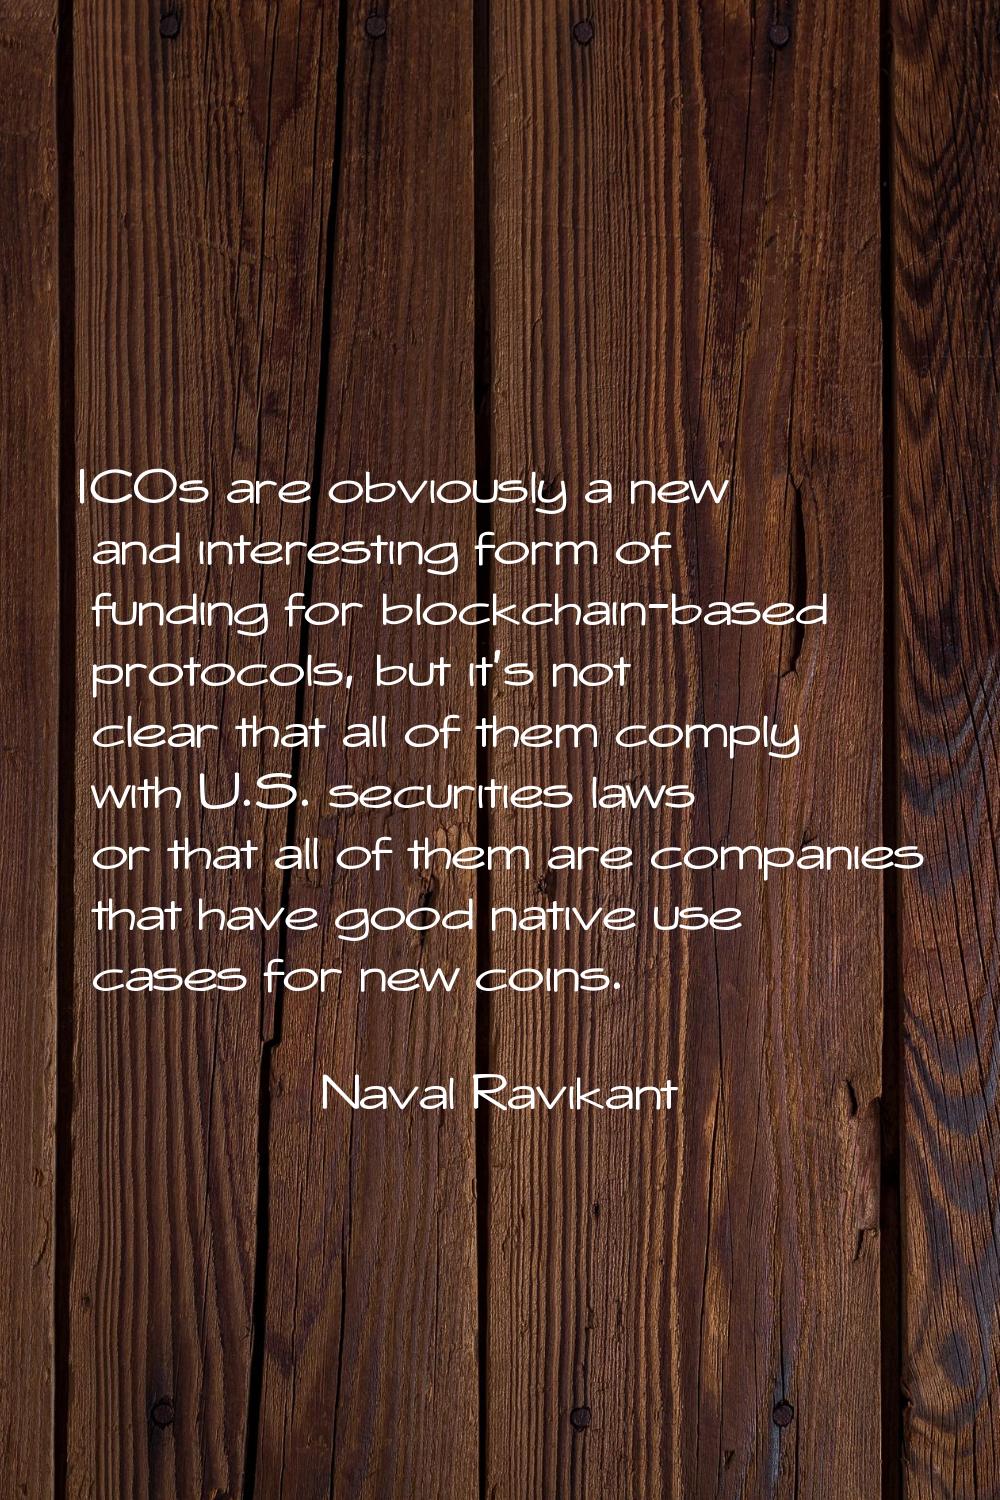 ICOs are obviously a new and interesting form of funding for blockchain-based protocols, but it's n